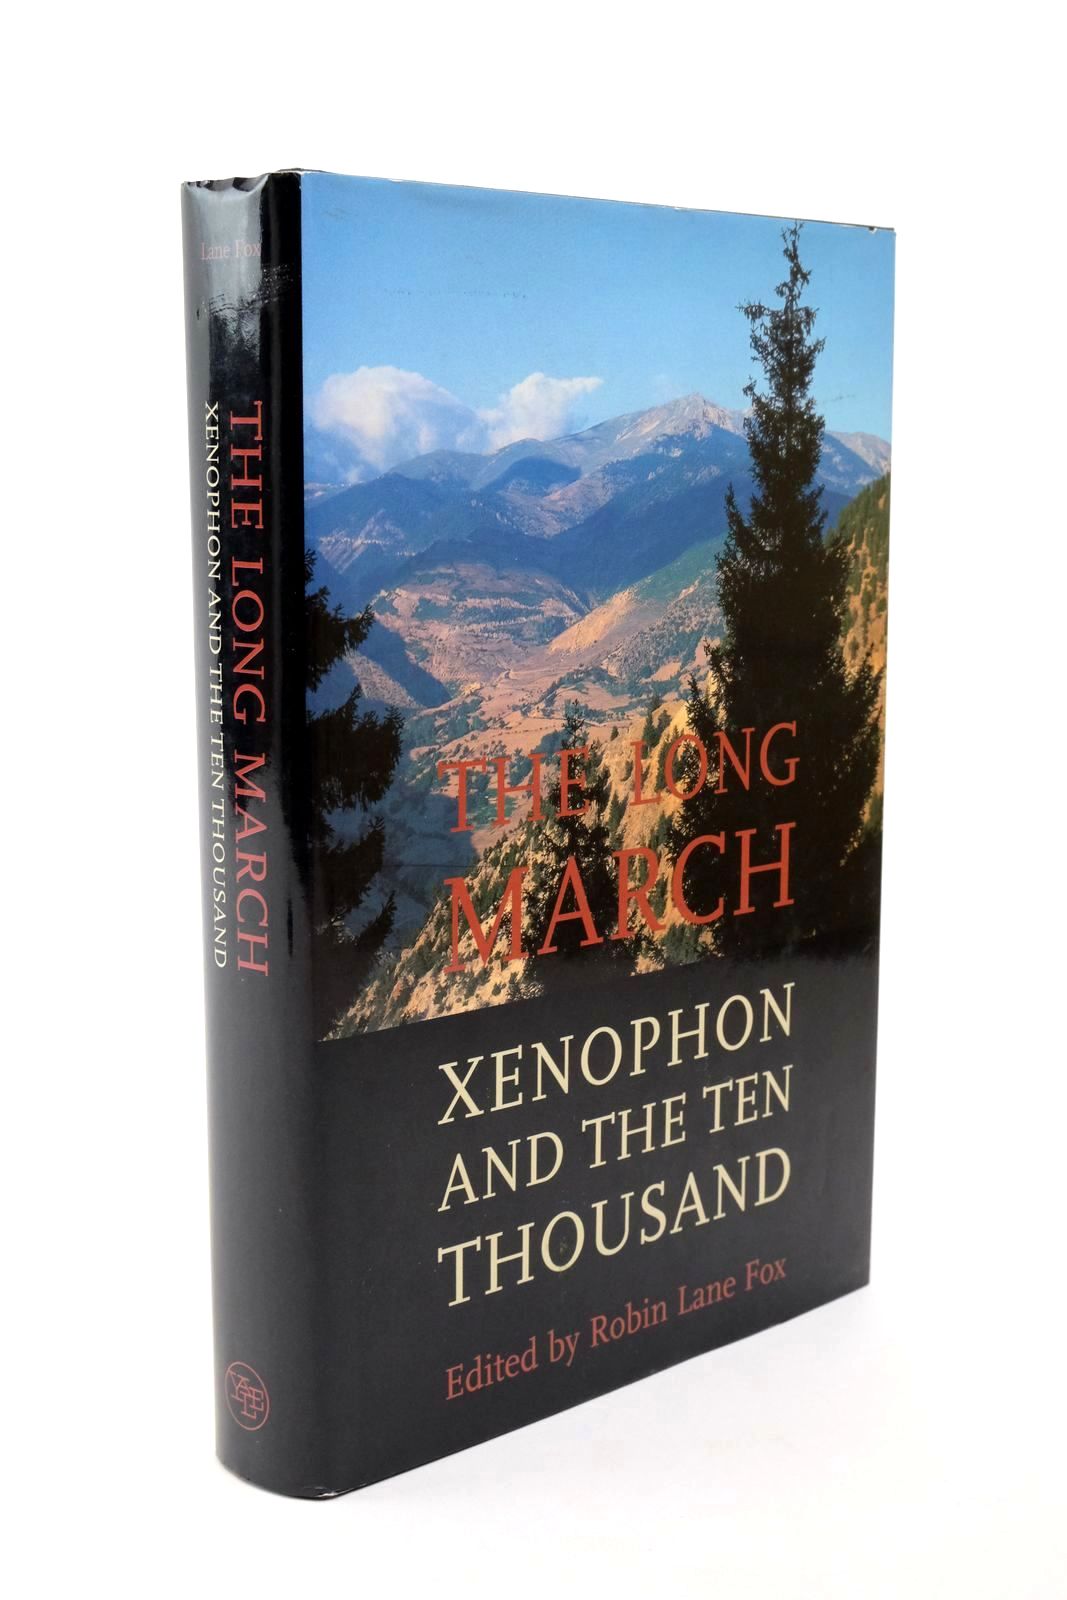 Photo of THE LONG MARCH - XENOPHON AND THE TEN THOUSAND written by Fox, Robin Lane published by Yale University Press (STOCK CODE: 1322608)  for sale by Stella & Rose's Books